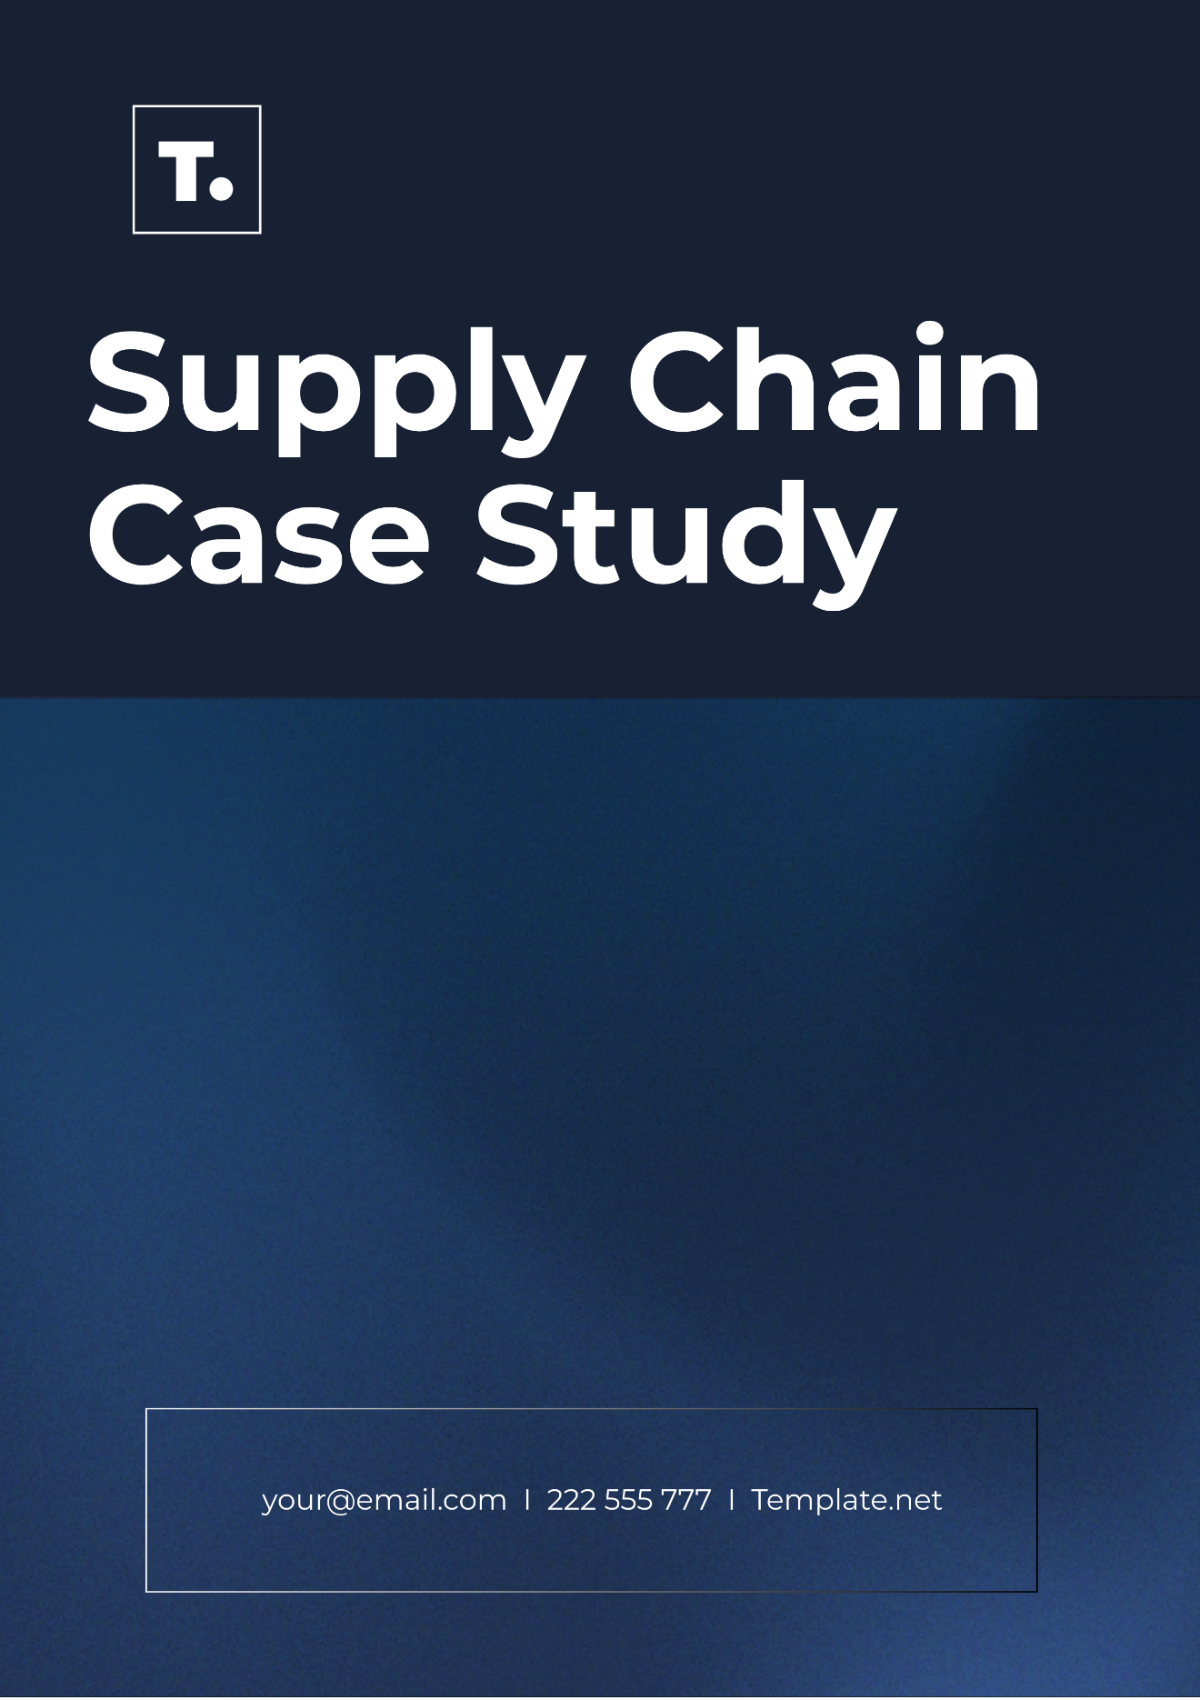 Supply Chain Case Study Template